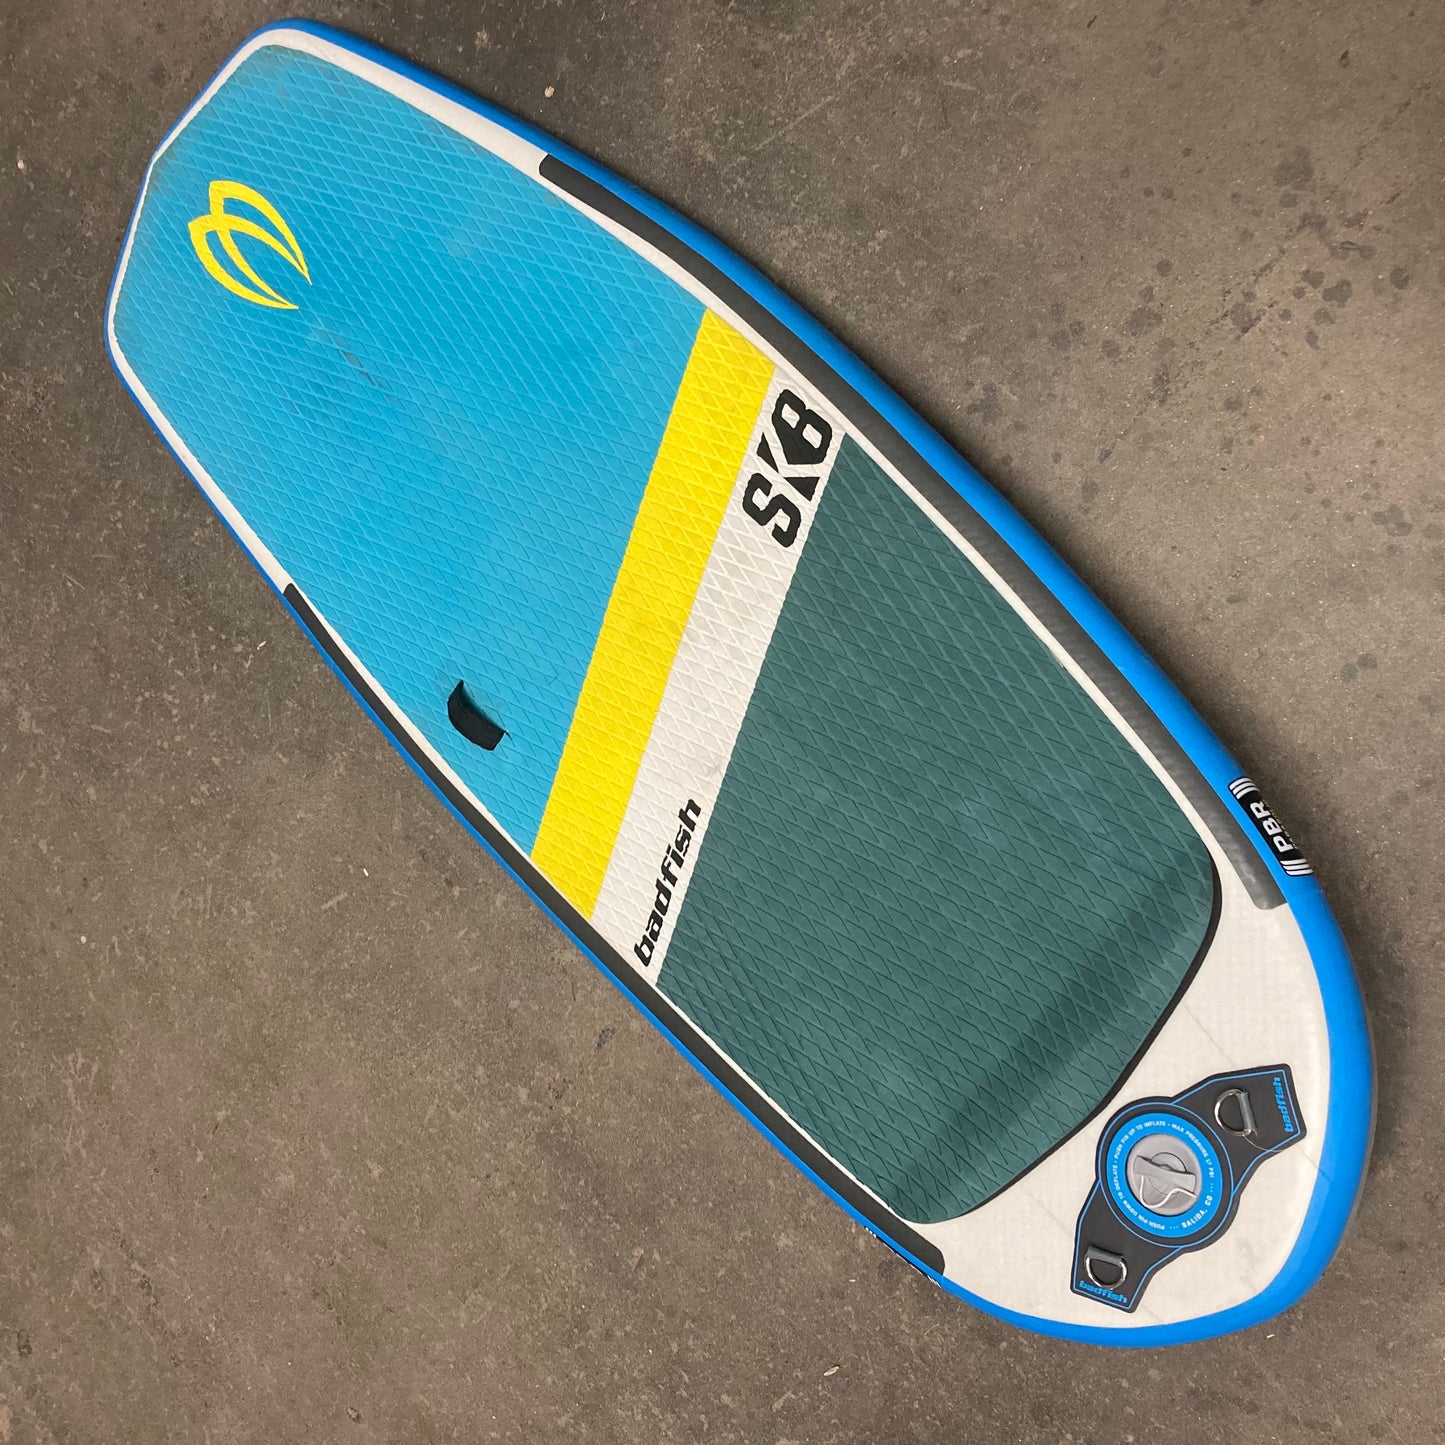 A Demo ISK8 stand up paddle board on a concrete floor.